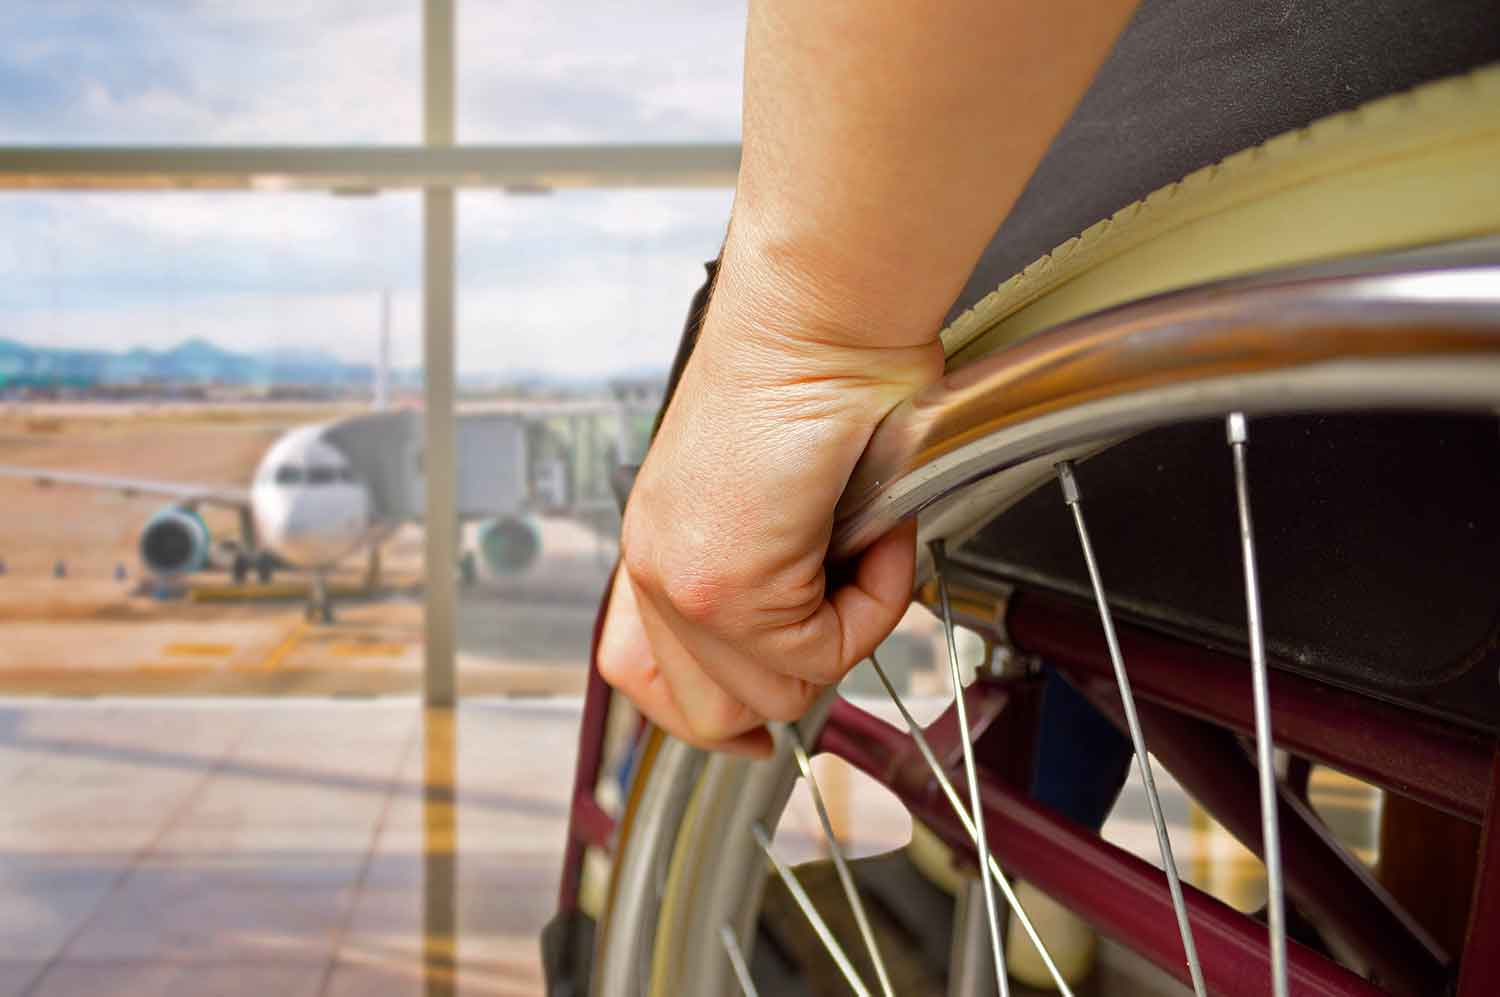 Closeup of a hand on the wheel of a wheelchair facing an airport window through which a plane is ready for boarding.